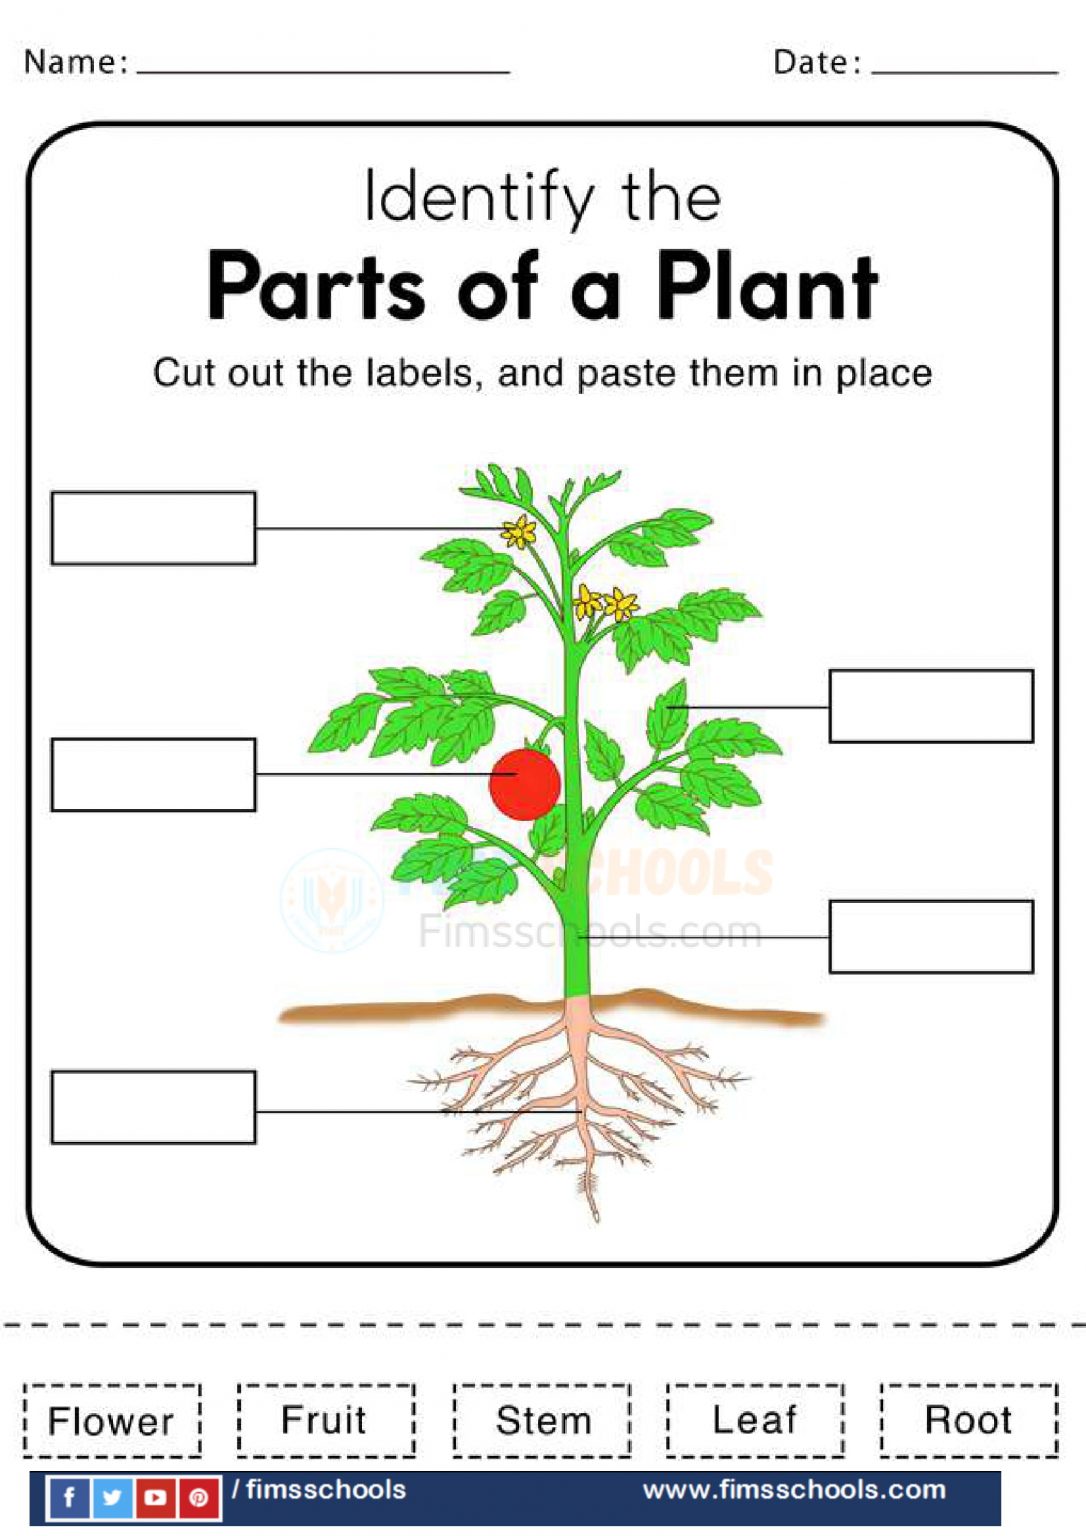 parts-of-a-plant-worksheets-page-2-fims-schools